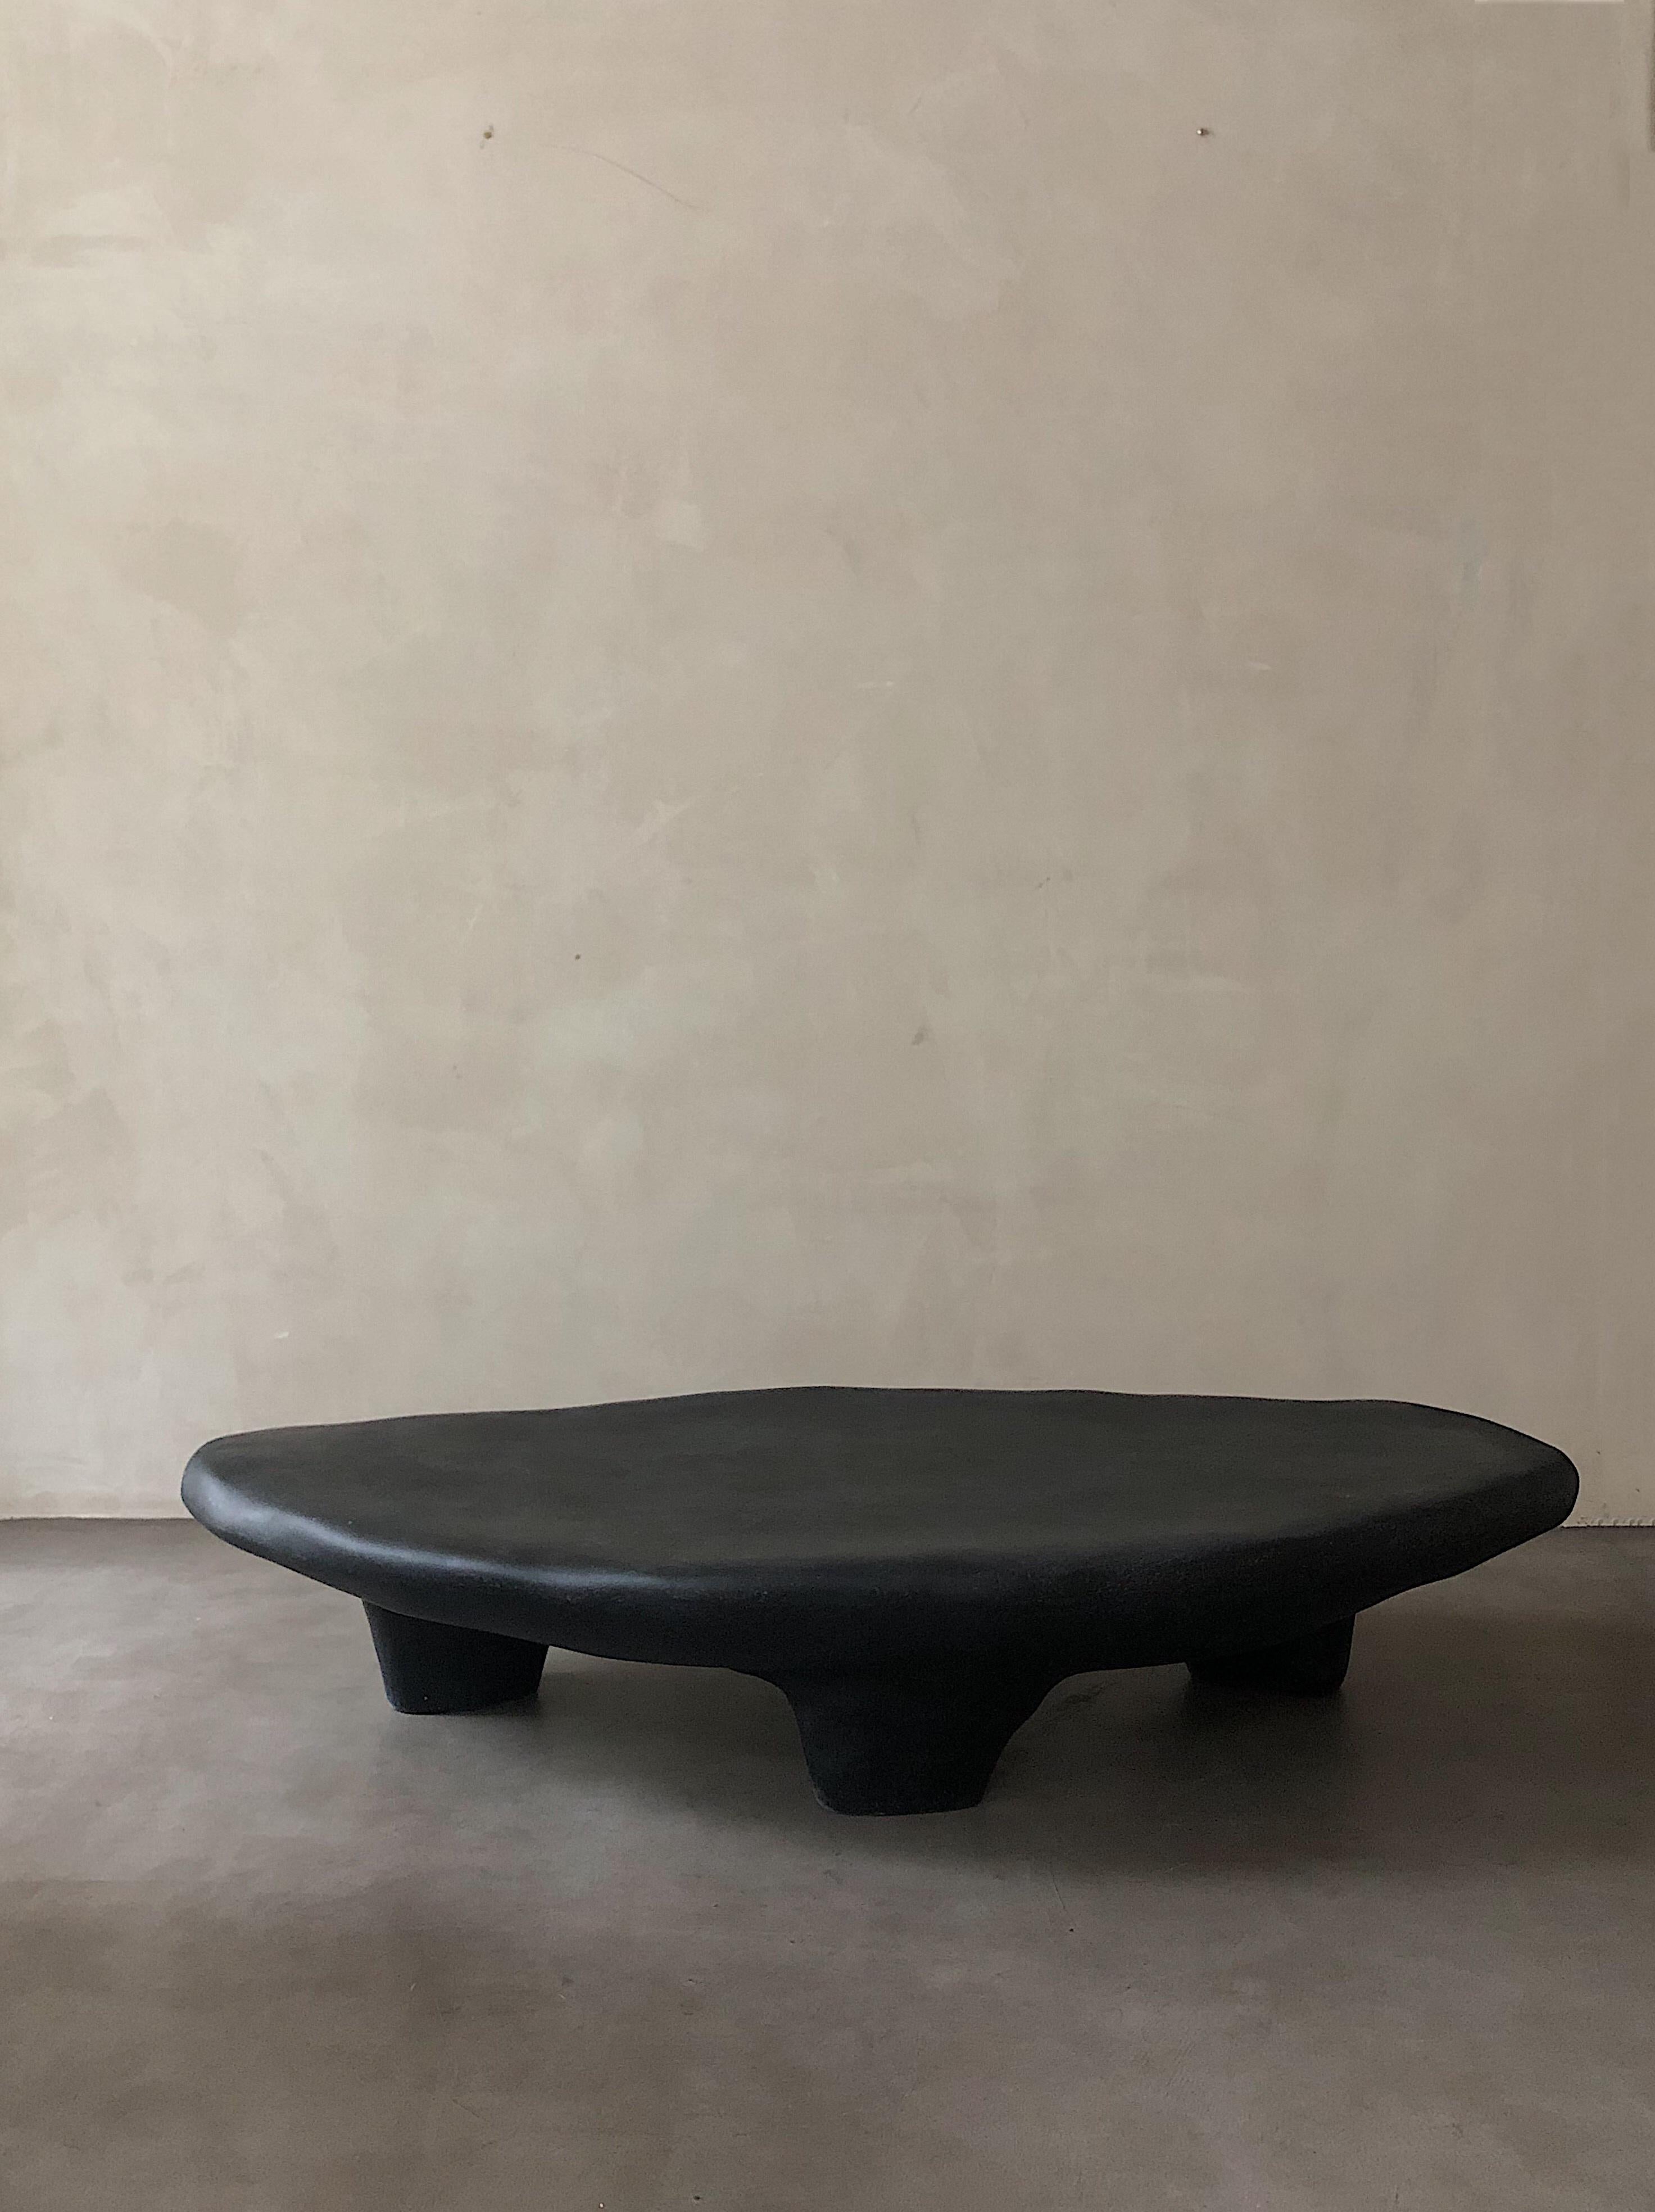 Black tripod coffee table by Karstudio
Materials: FRP
Dimensions: 150 x 85 x 30 cm

This piece is suitable for outdoor use.
 

Inspired by three-leg utensils which were the first creation of human being in ancient times. Triangle structure